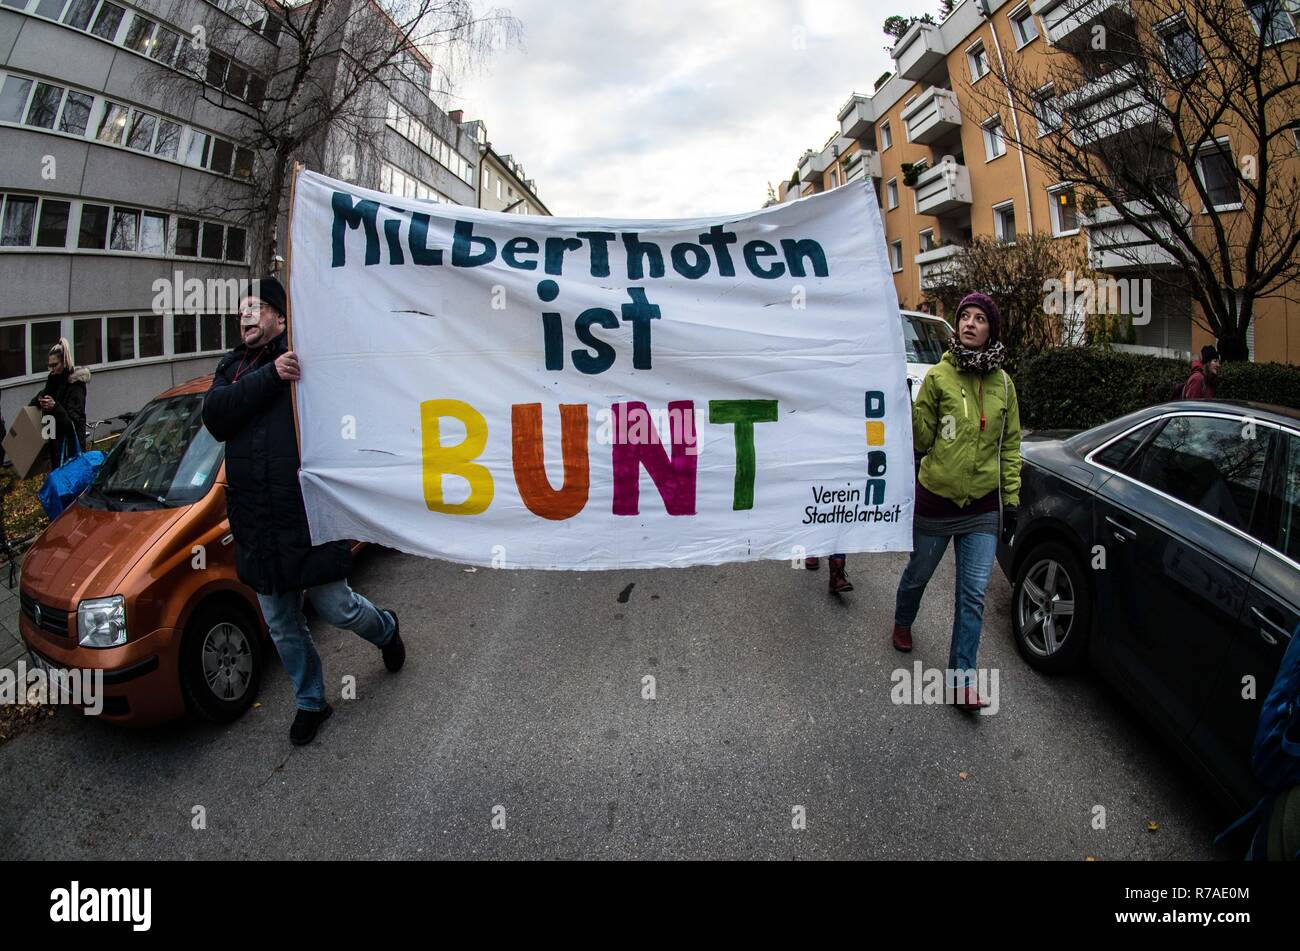 Munich, Bavaria, Germany. 8th December, 2018. Demonstrators from the Milberthofen district of Munich. Pegida Dresden in Munich, the self-proclaimed original Pegida, organized a rally in the city's Milberthofen district in front of the Dankeskirche (Thanks Church) of Munich. Headed by Michael Stuerzenberger, the group rallied against the United Nations Migration Pact. Speaking with Stuerzenberger was Gernot Tege Credit Credit: ZUMA Press, Inc./Alamy Live News Stock Photo